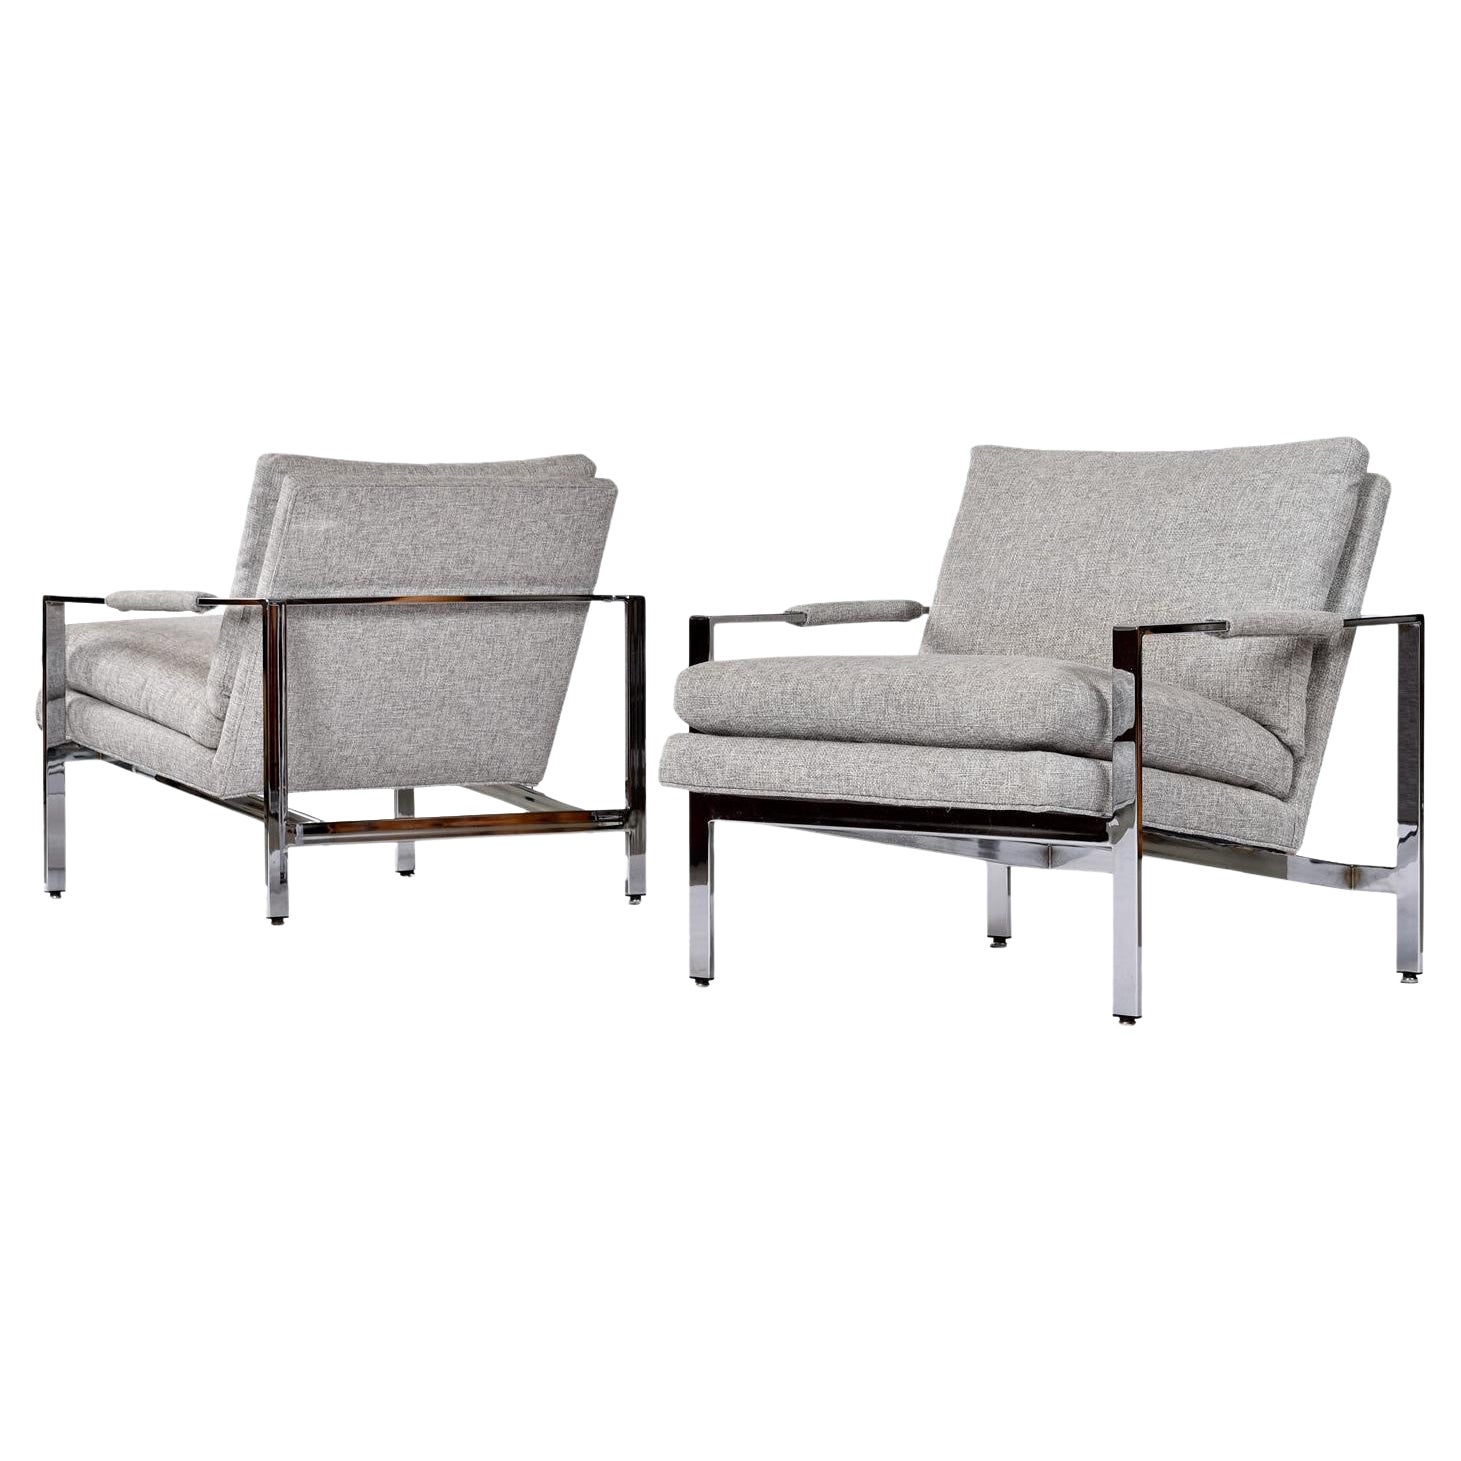 Milo Baughman For Thayer Coggin 951 Flat Bar Chrome Lounge Chairs in Grey Tweed For Sale